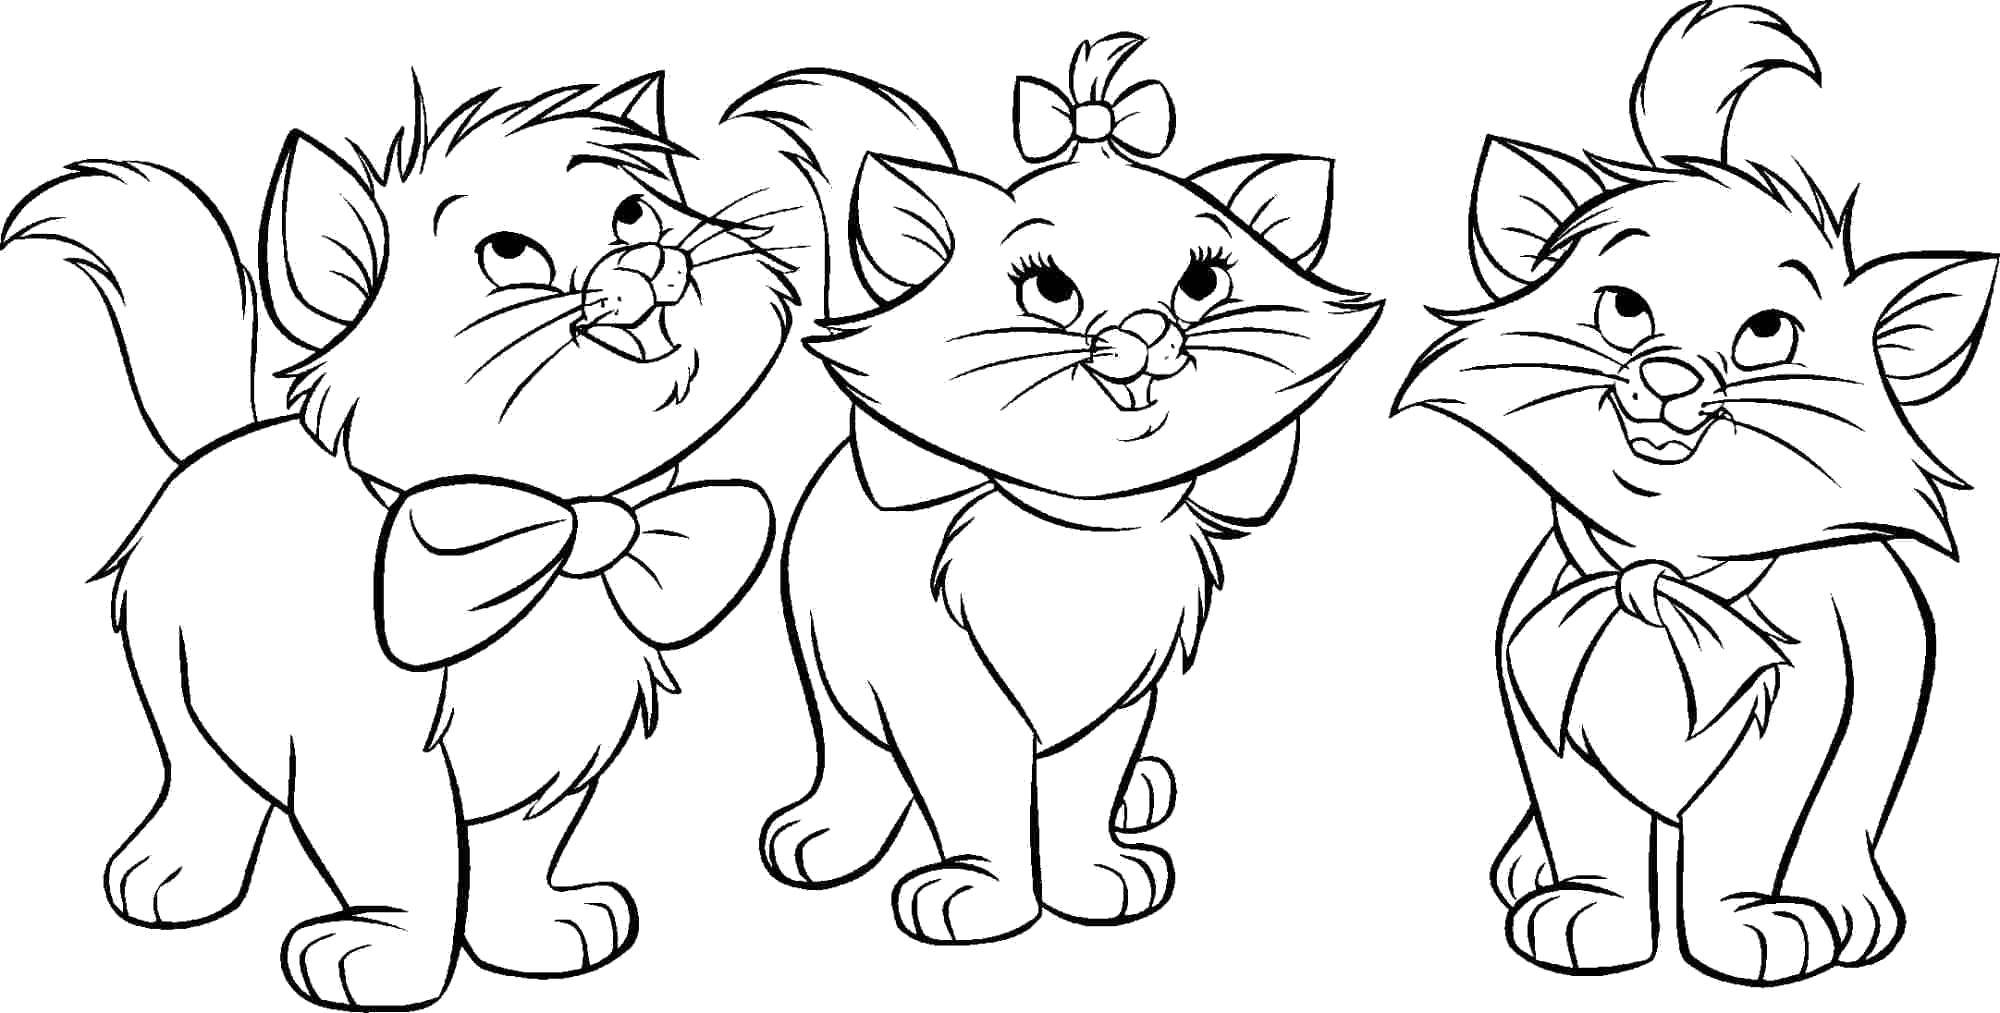 Coloring Berlioz, Marie and Toulouse. Category cats aristocrats. Tags:  Cats , the aristocats, Disney, cartoon.